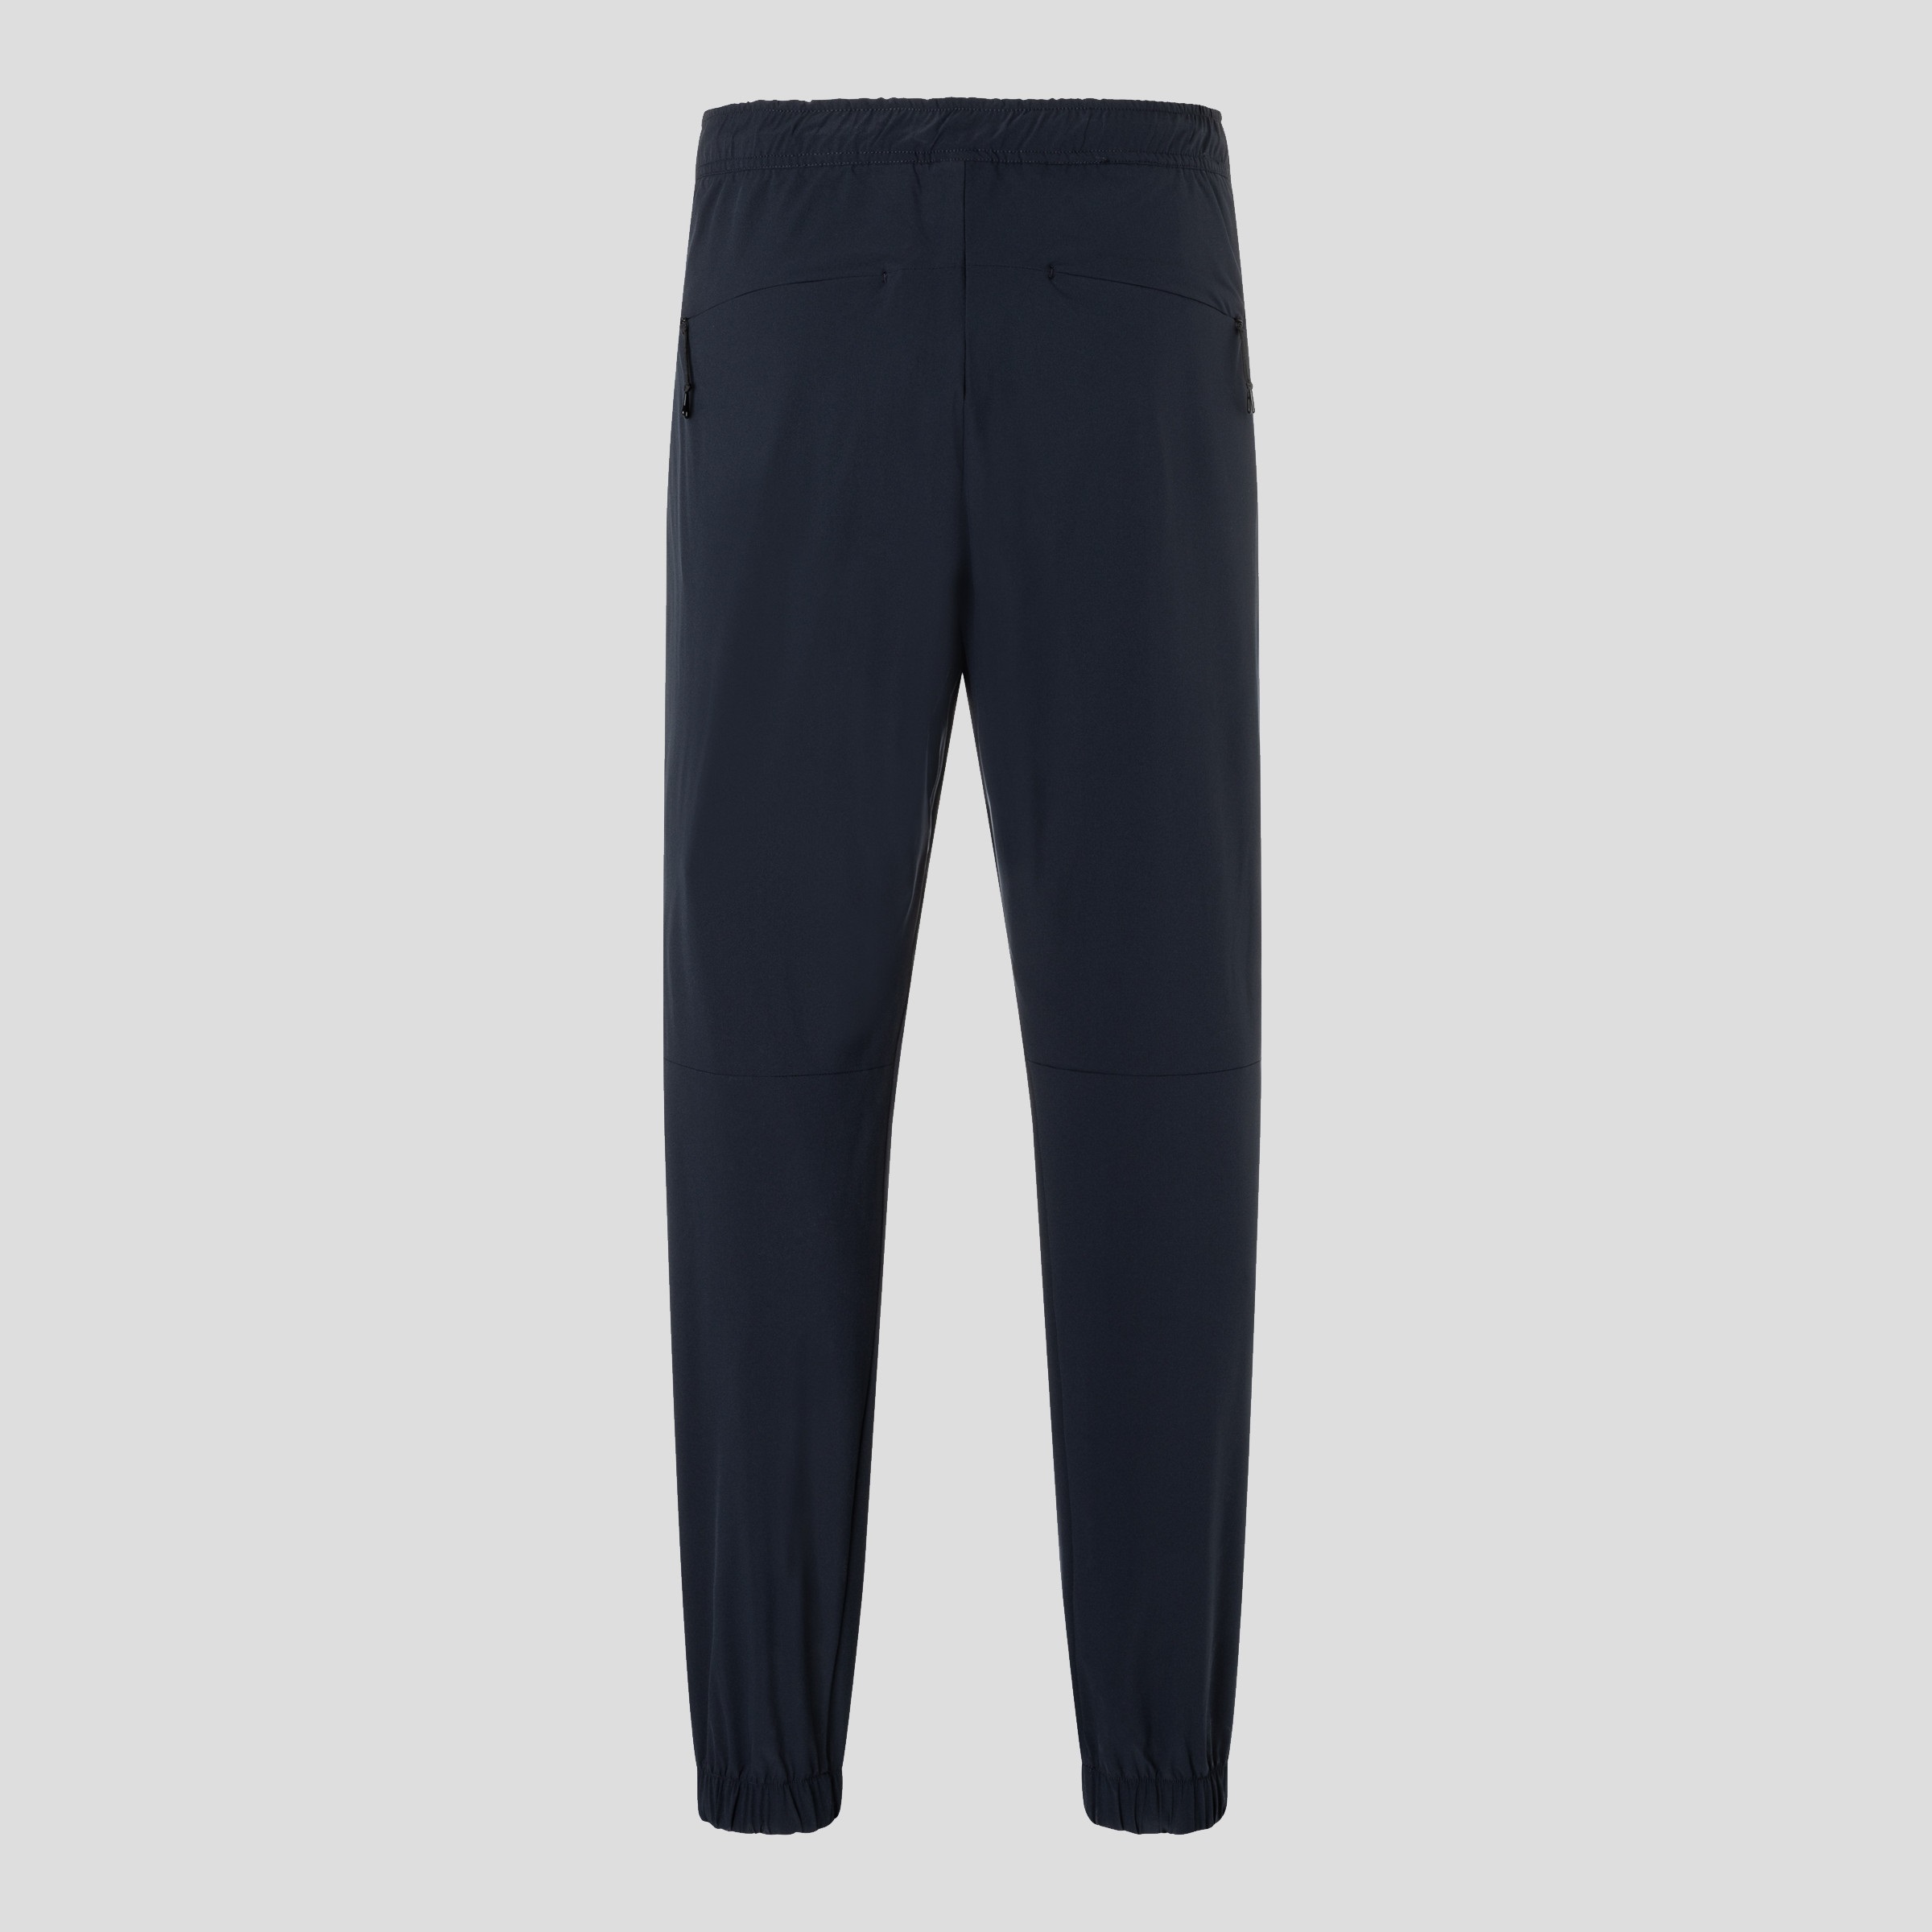 Pantaloni Lungi -  bogner fire and ice BEVAN Performance Trousers